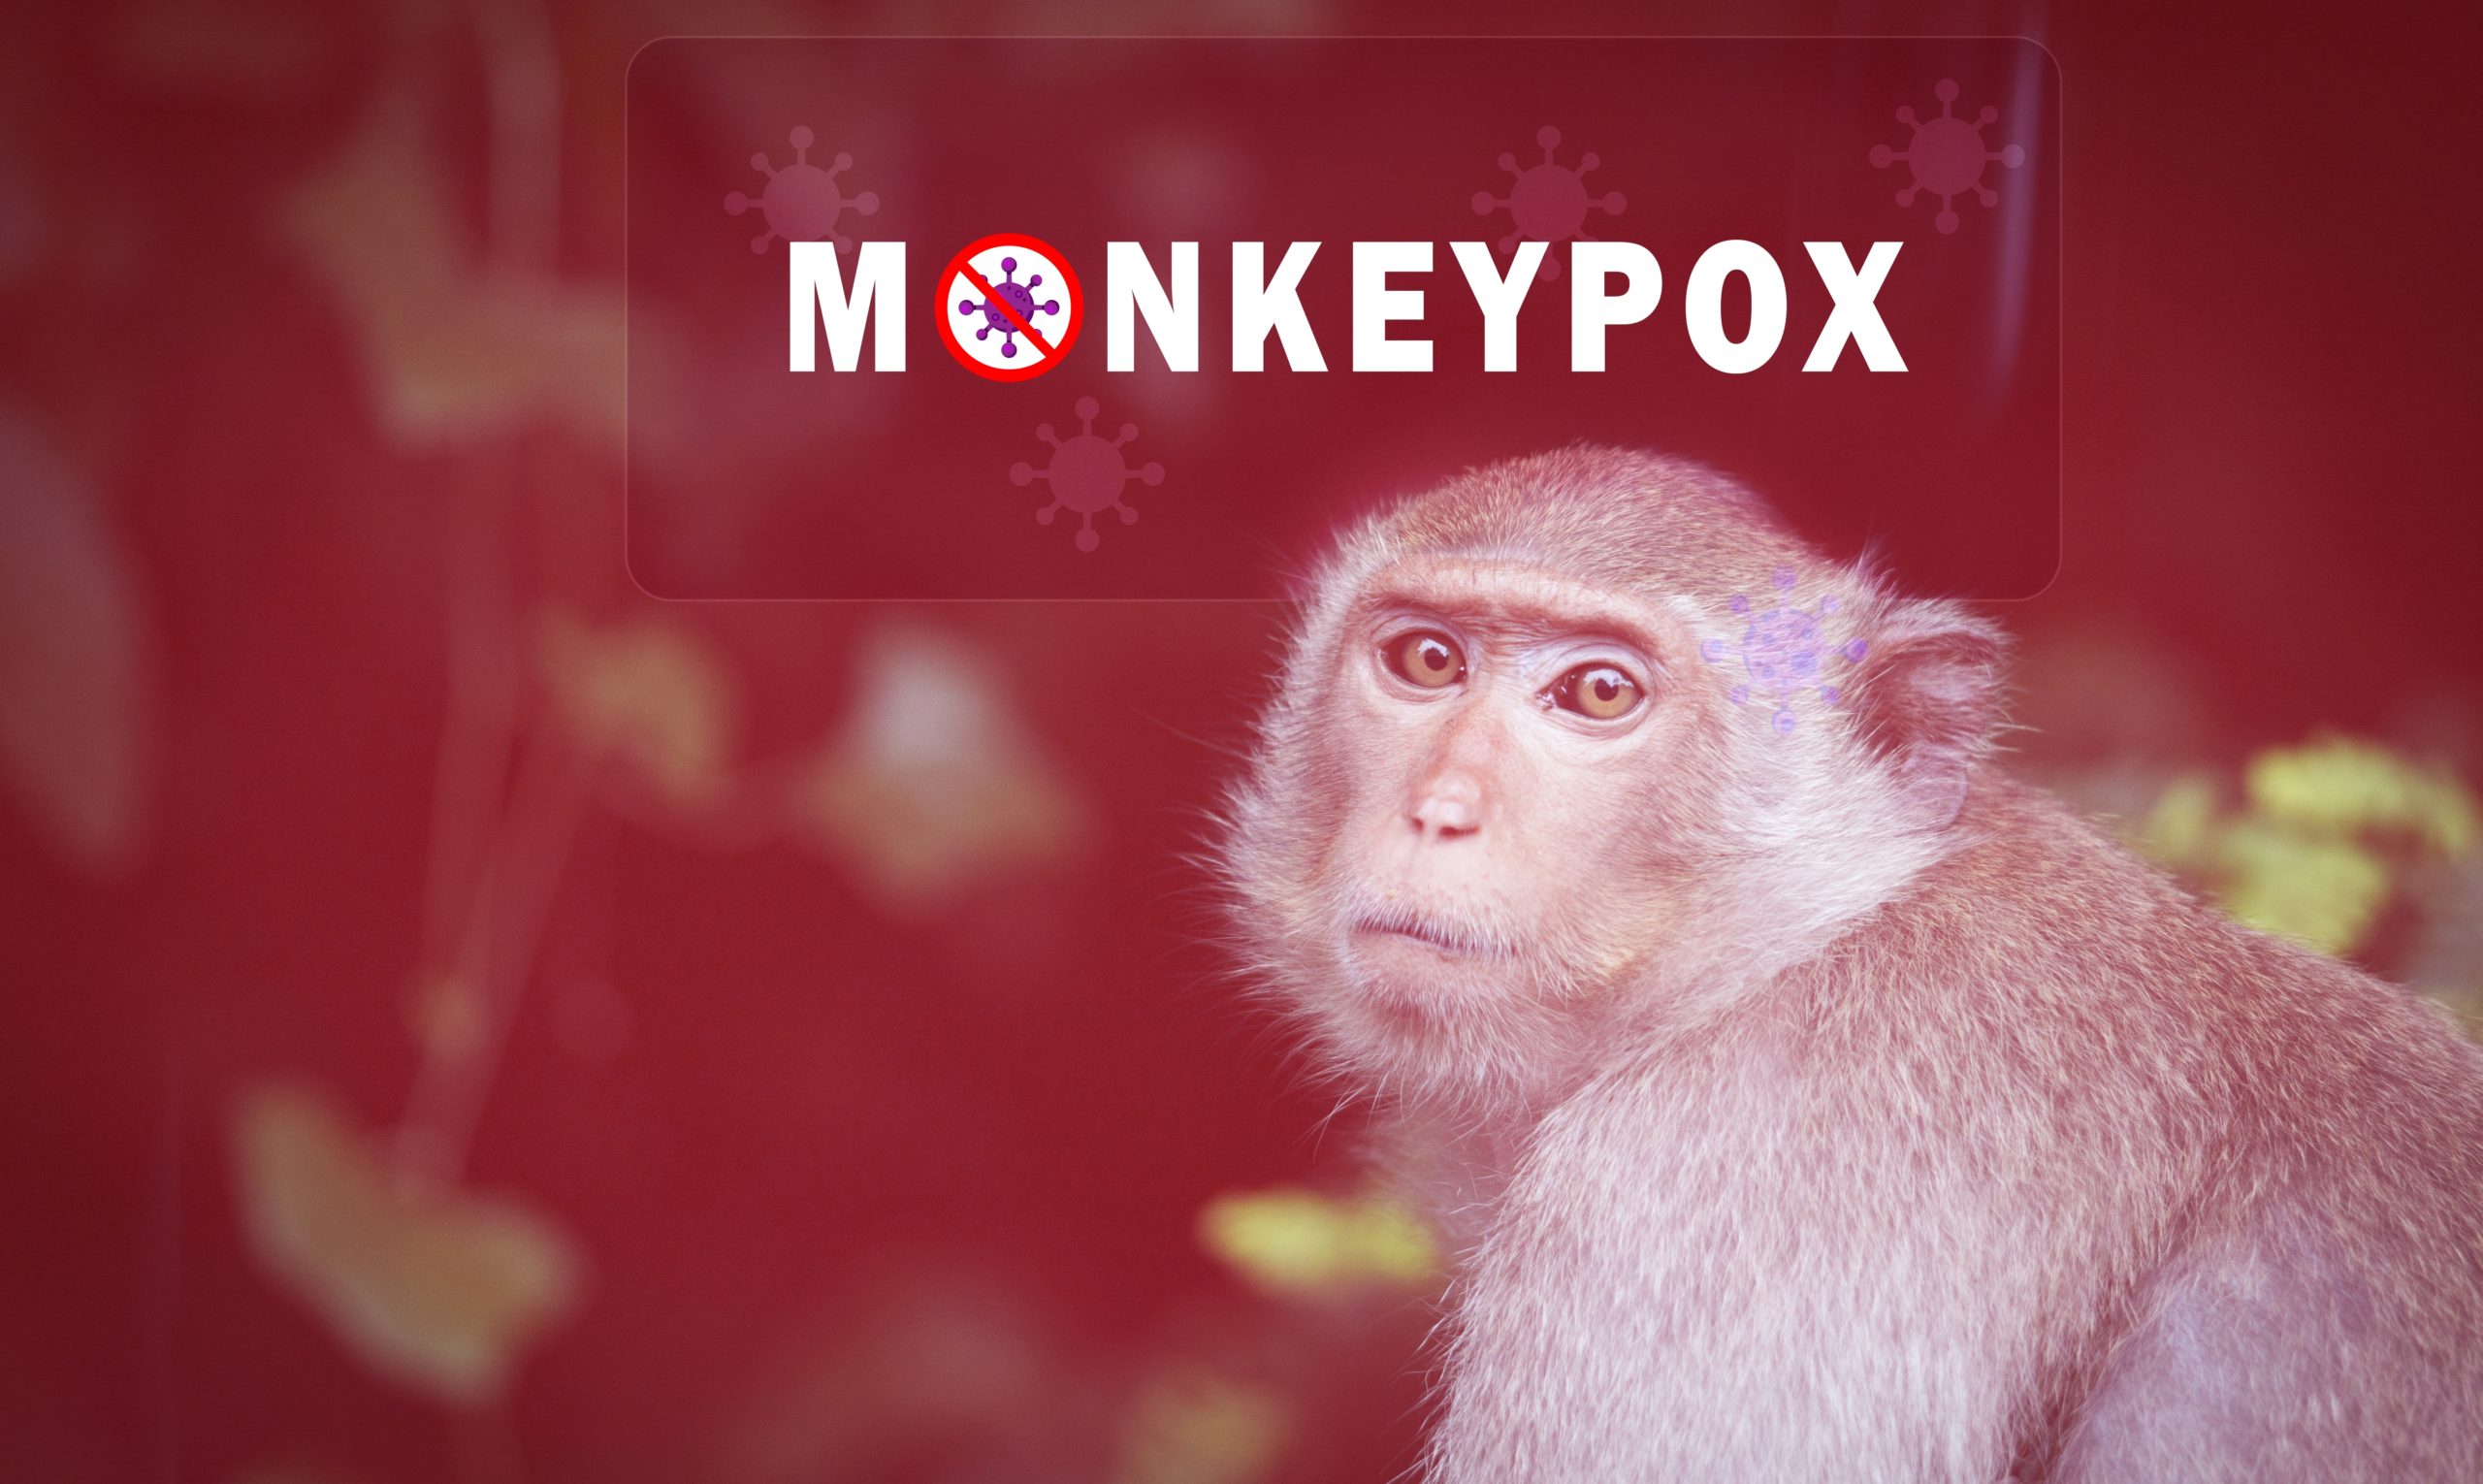 Montreal is the epicenter of Monkeypox in North America